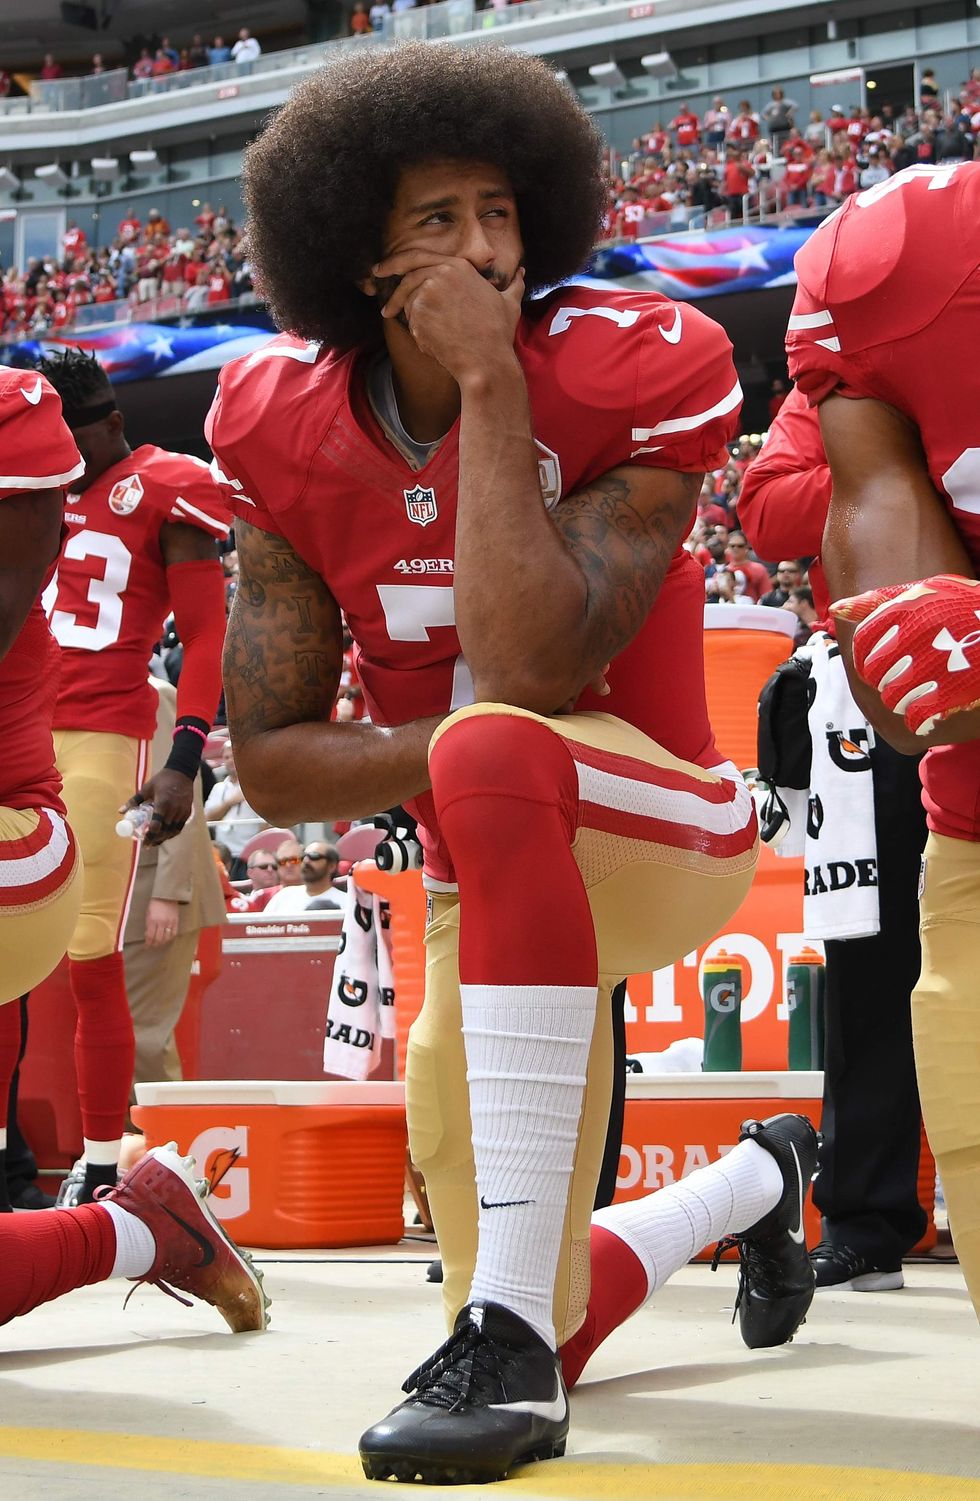 No team wants Colin Kaepernick. And it's not because of his protests.